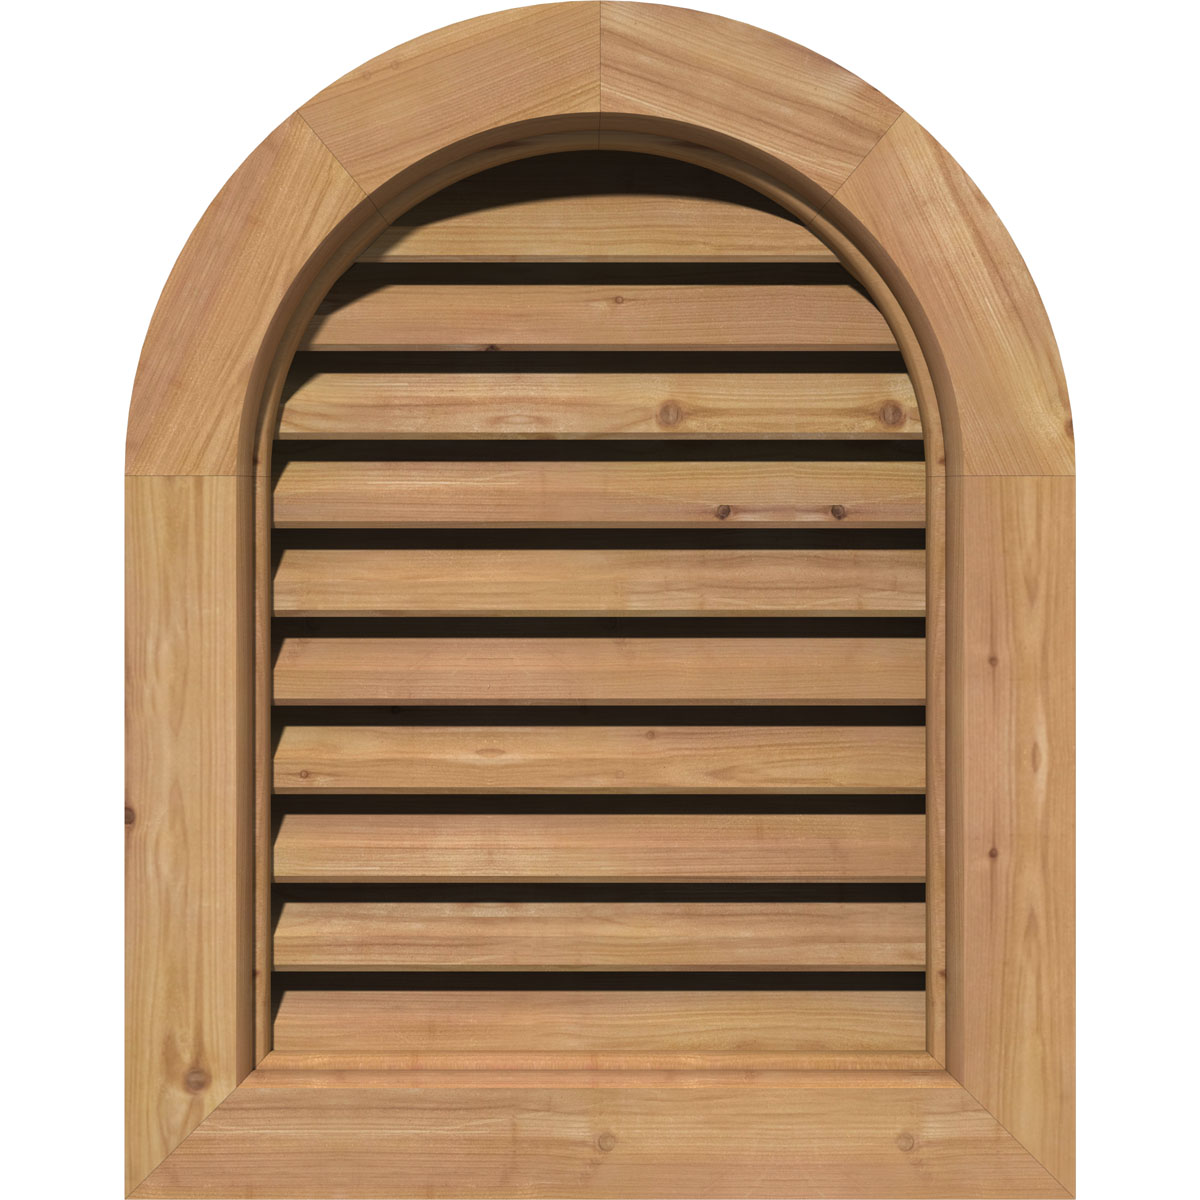 12"W x 32"H Round Top Gable Vent (17"W x 37"H Frame Size): Unfinished, Functional, Smooth Western Red Cedar Gable Vent w/ Brick Mould Face Frame - image 1 of 12